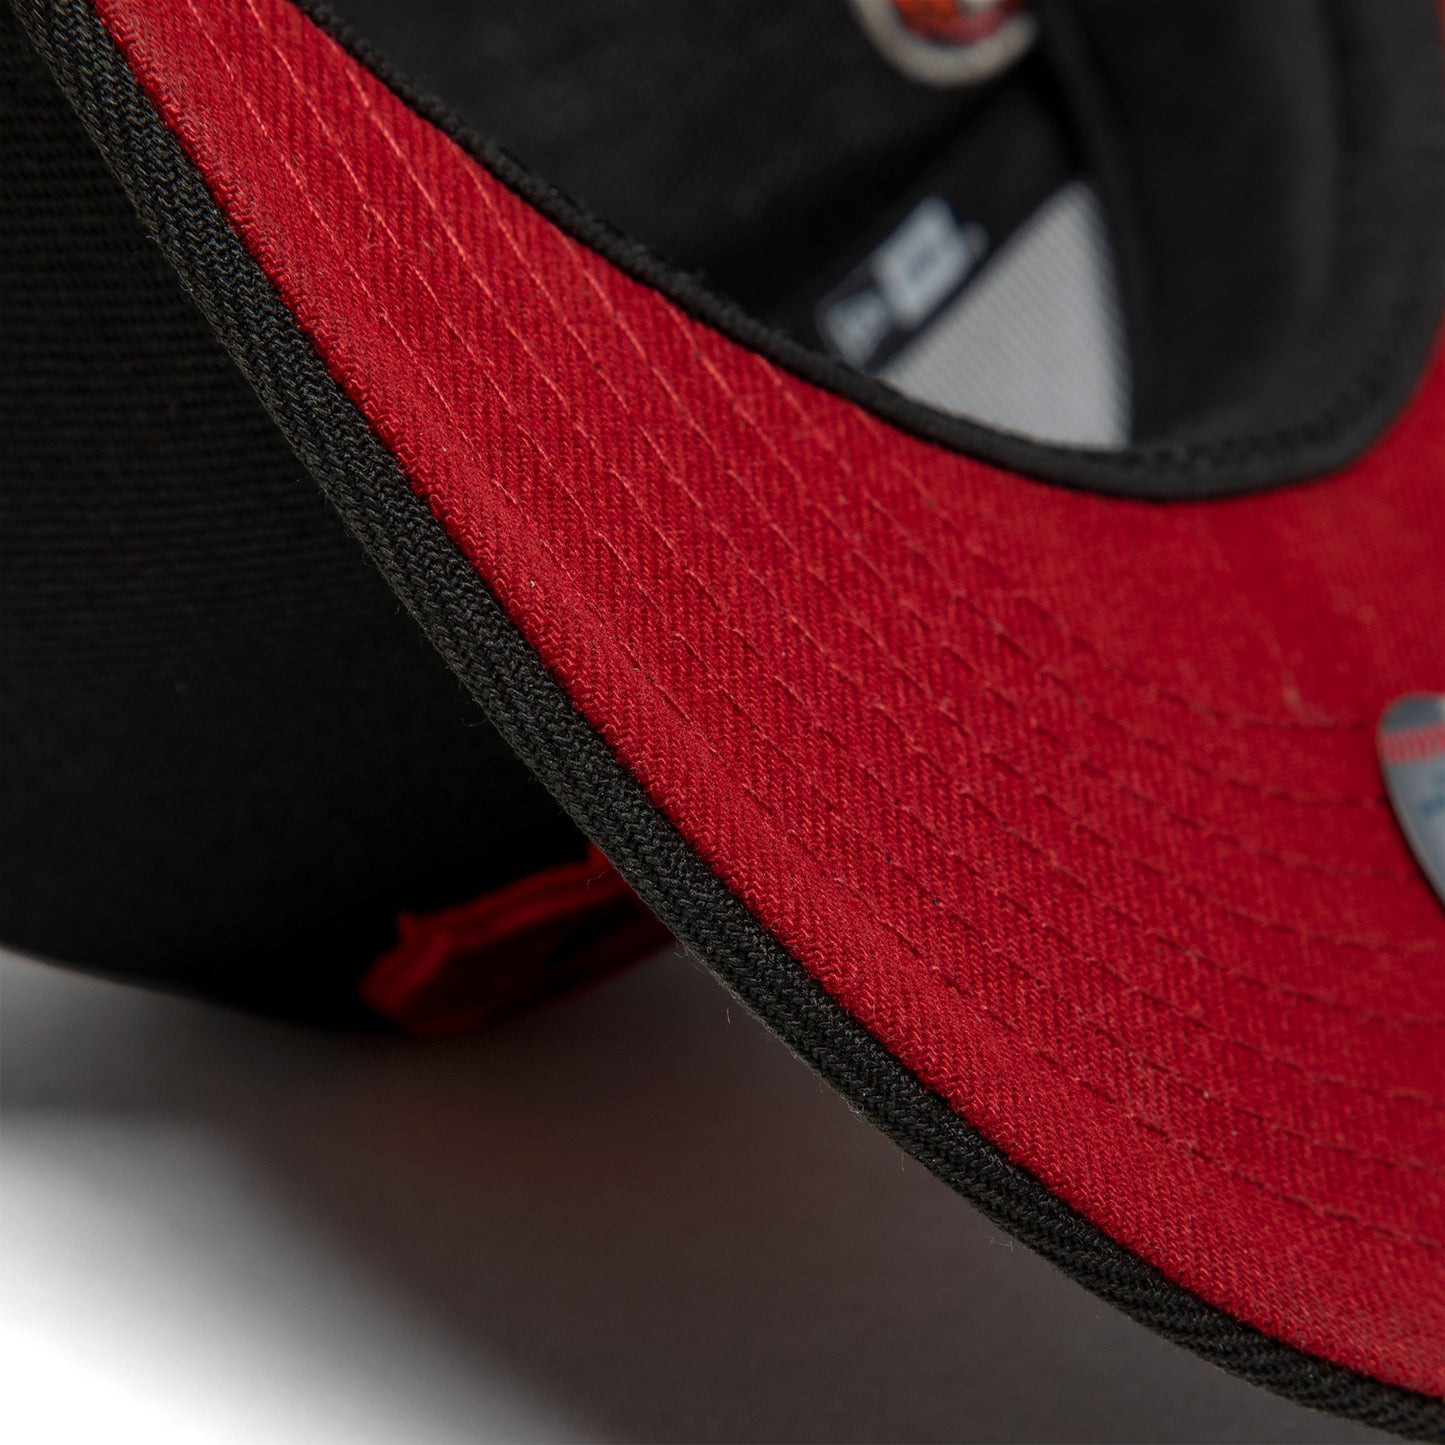 Concepts x New Era 59Fifty Boston Red Sox Fitted Hat (Black/Red)